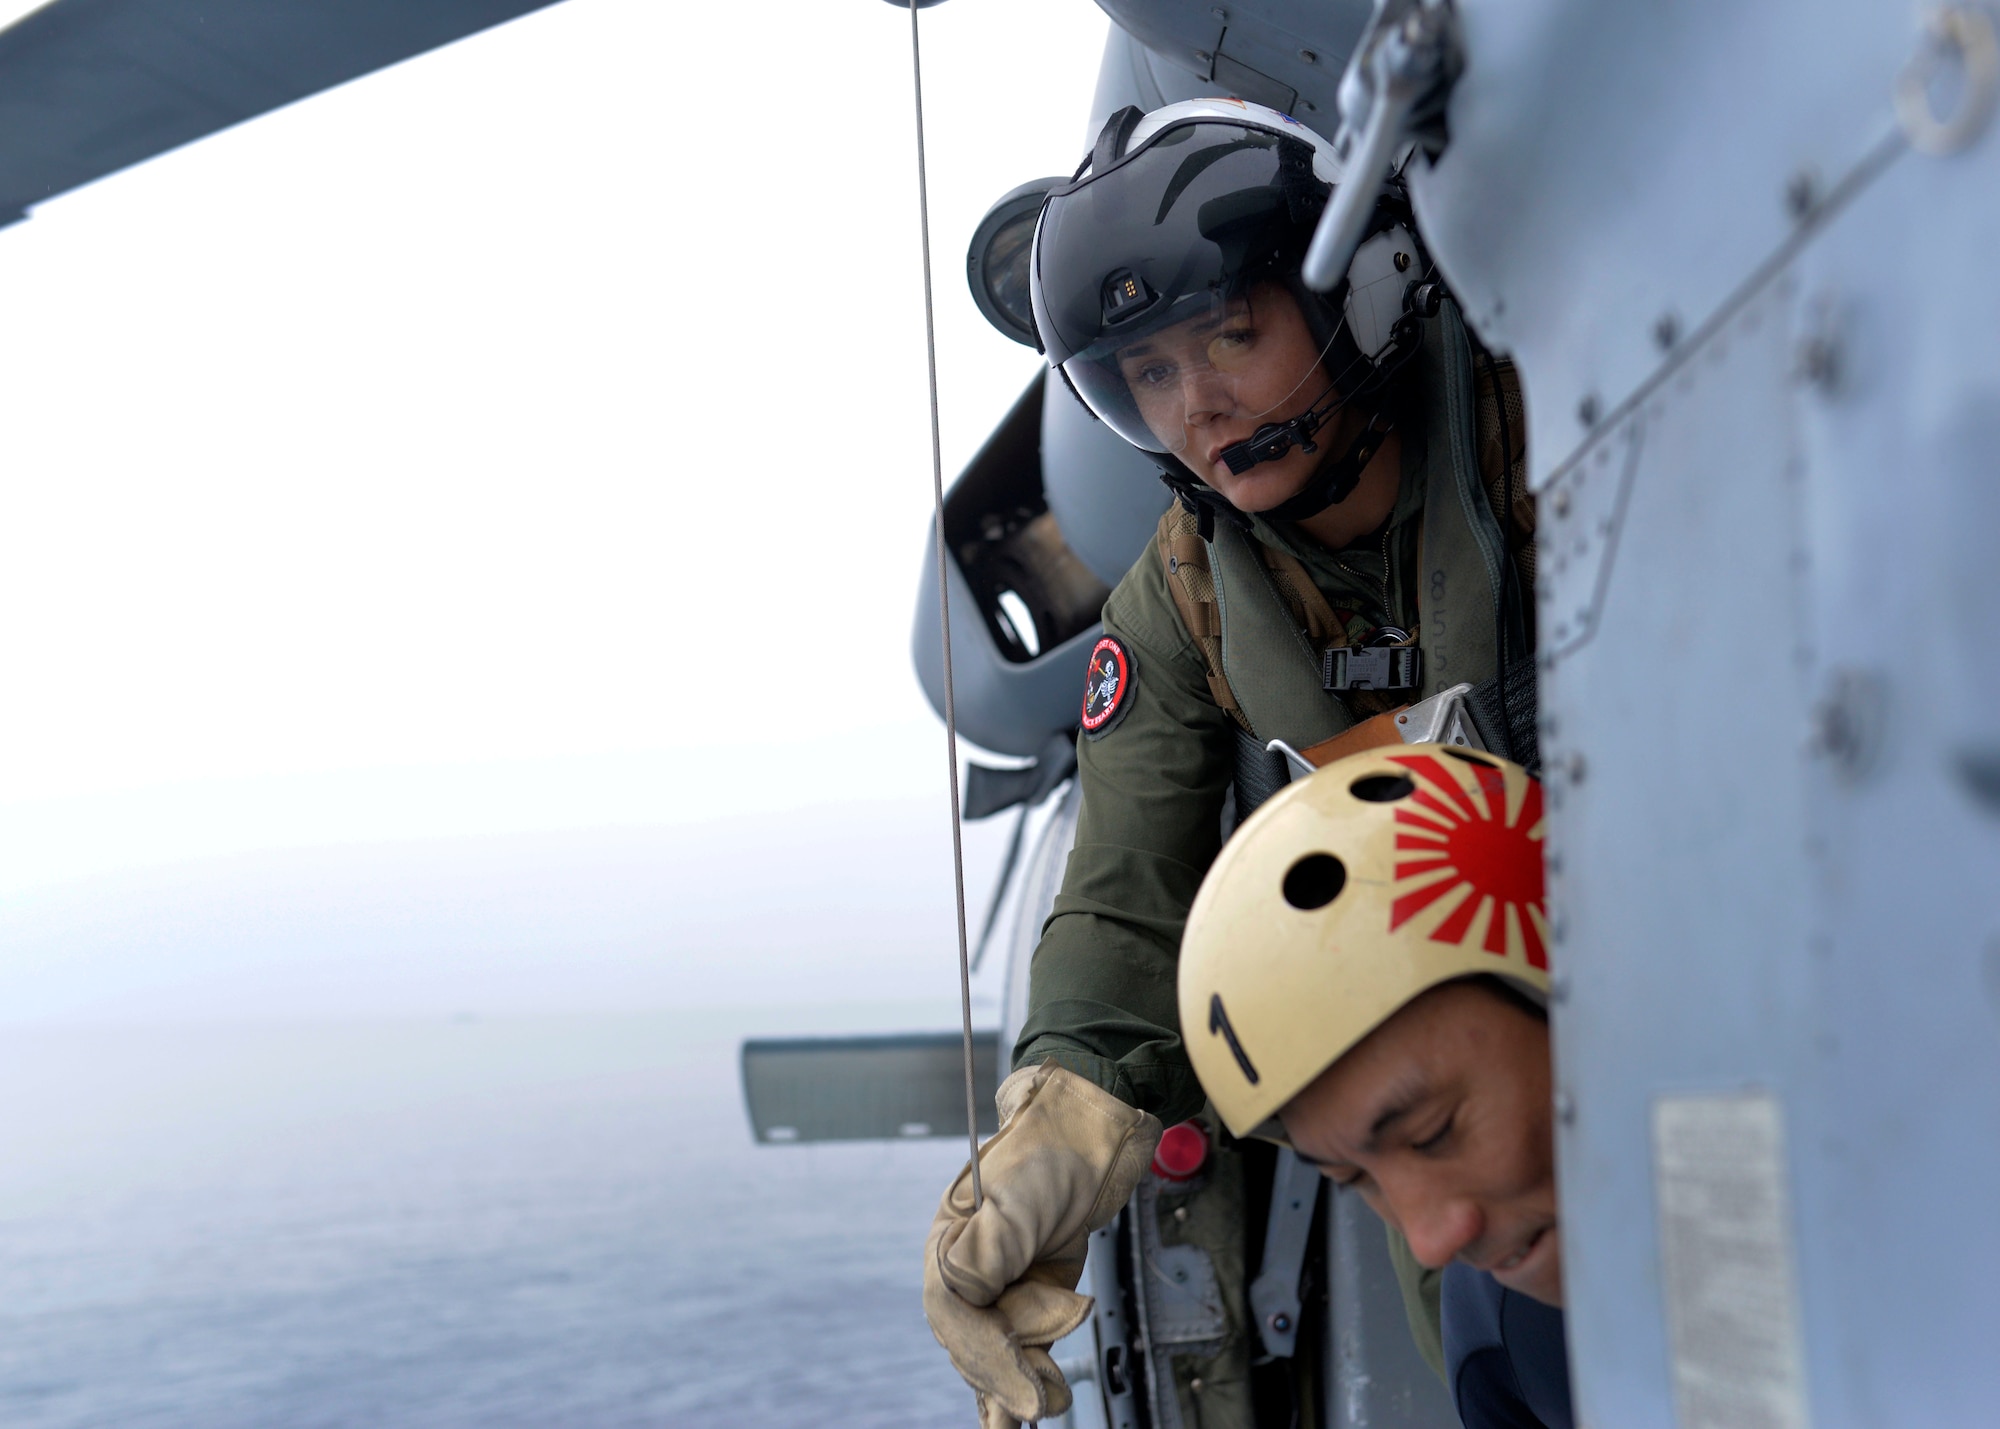 U.S. Navy Naval Aircrewman (Helicopter) 1st Class Calah Sanchez, top, assigned with the Helicopter Sea Combat Squadron 25, works with a Japanese Maritime Self-Defense Force member, bottom, during the Mine Countermeasures Exercise 2JA near the region surrounding Misawa Air Base, Japan, July 20, 2016. The annual bilateral exercise is held between the U.S. Navy and JMSDF to strengthen interoperability and increase proficiencies in mine countermeasure operations. (U.S. Navy photo by Mass Communication Specialist 2nd Class Samuel Weldin)